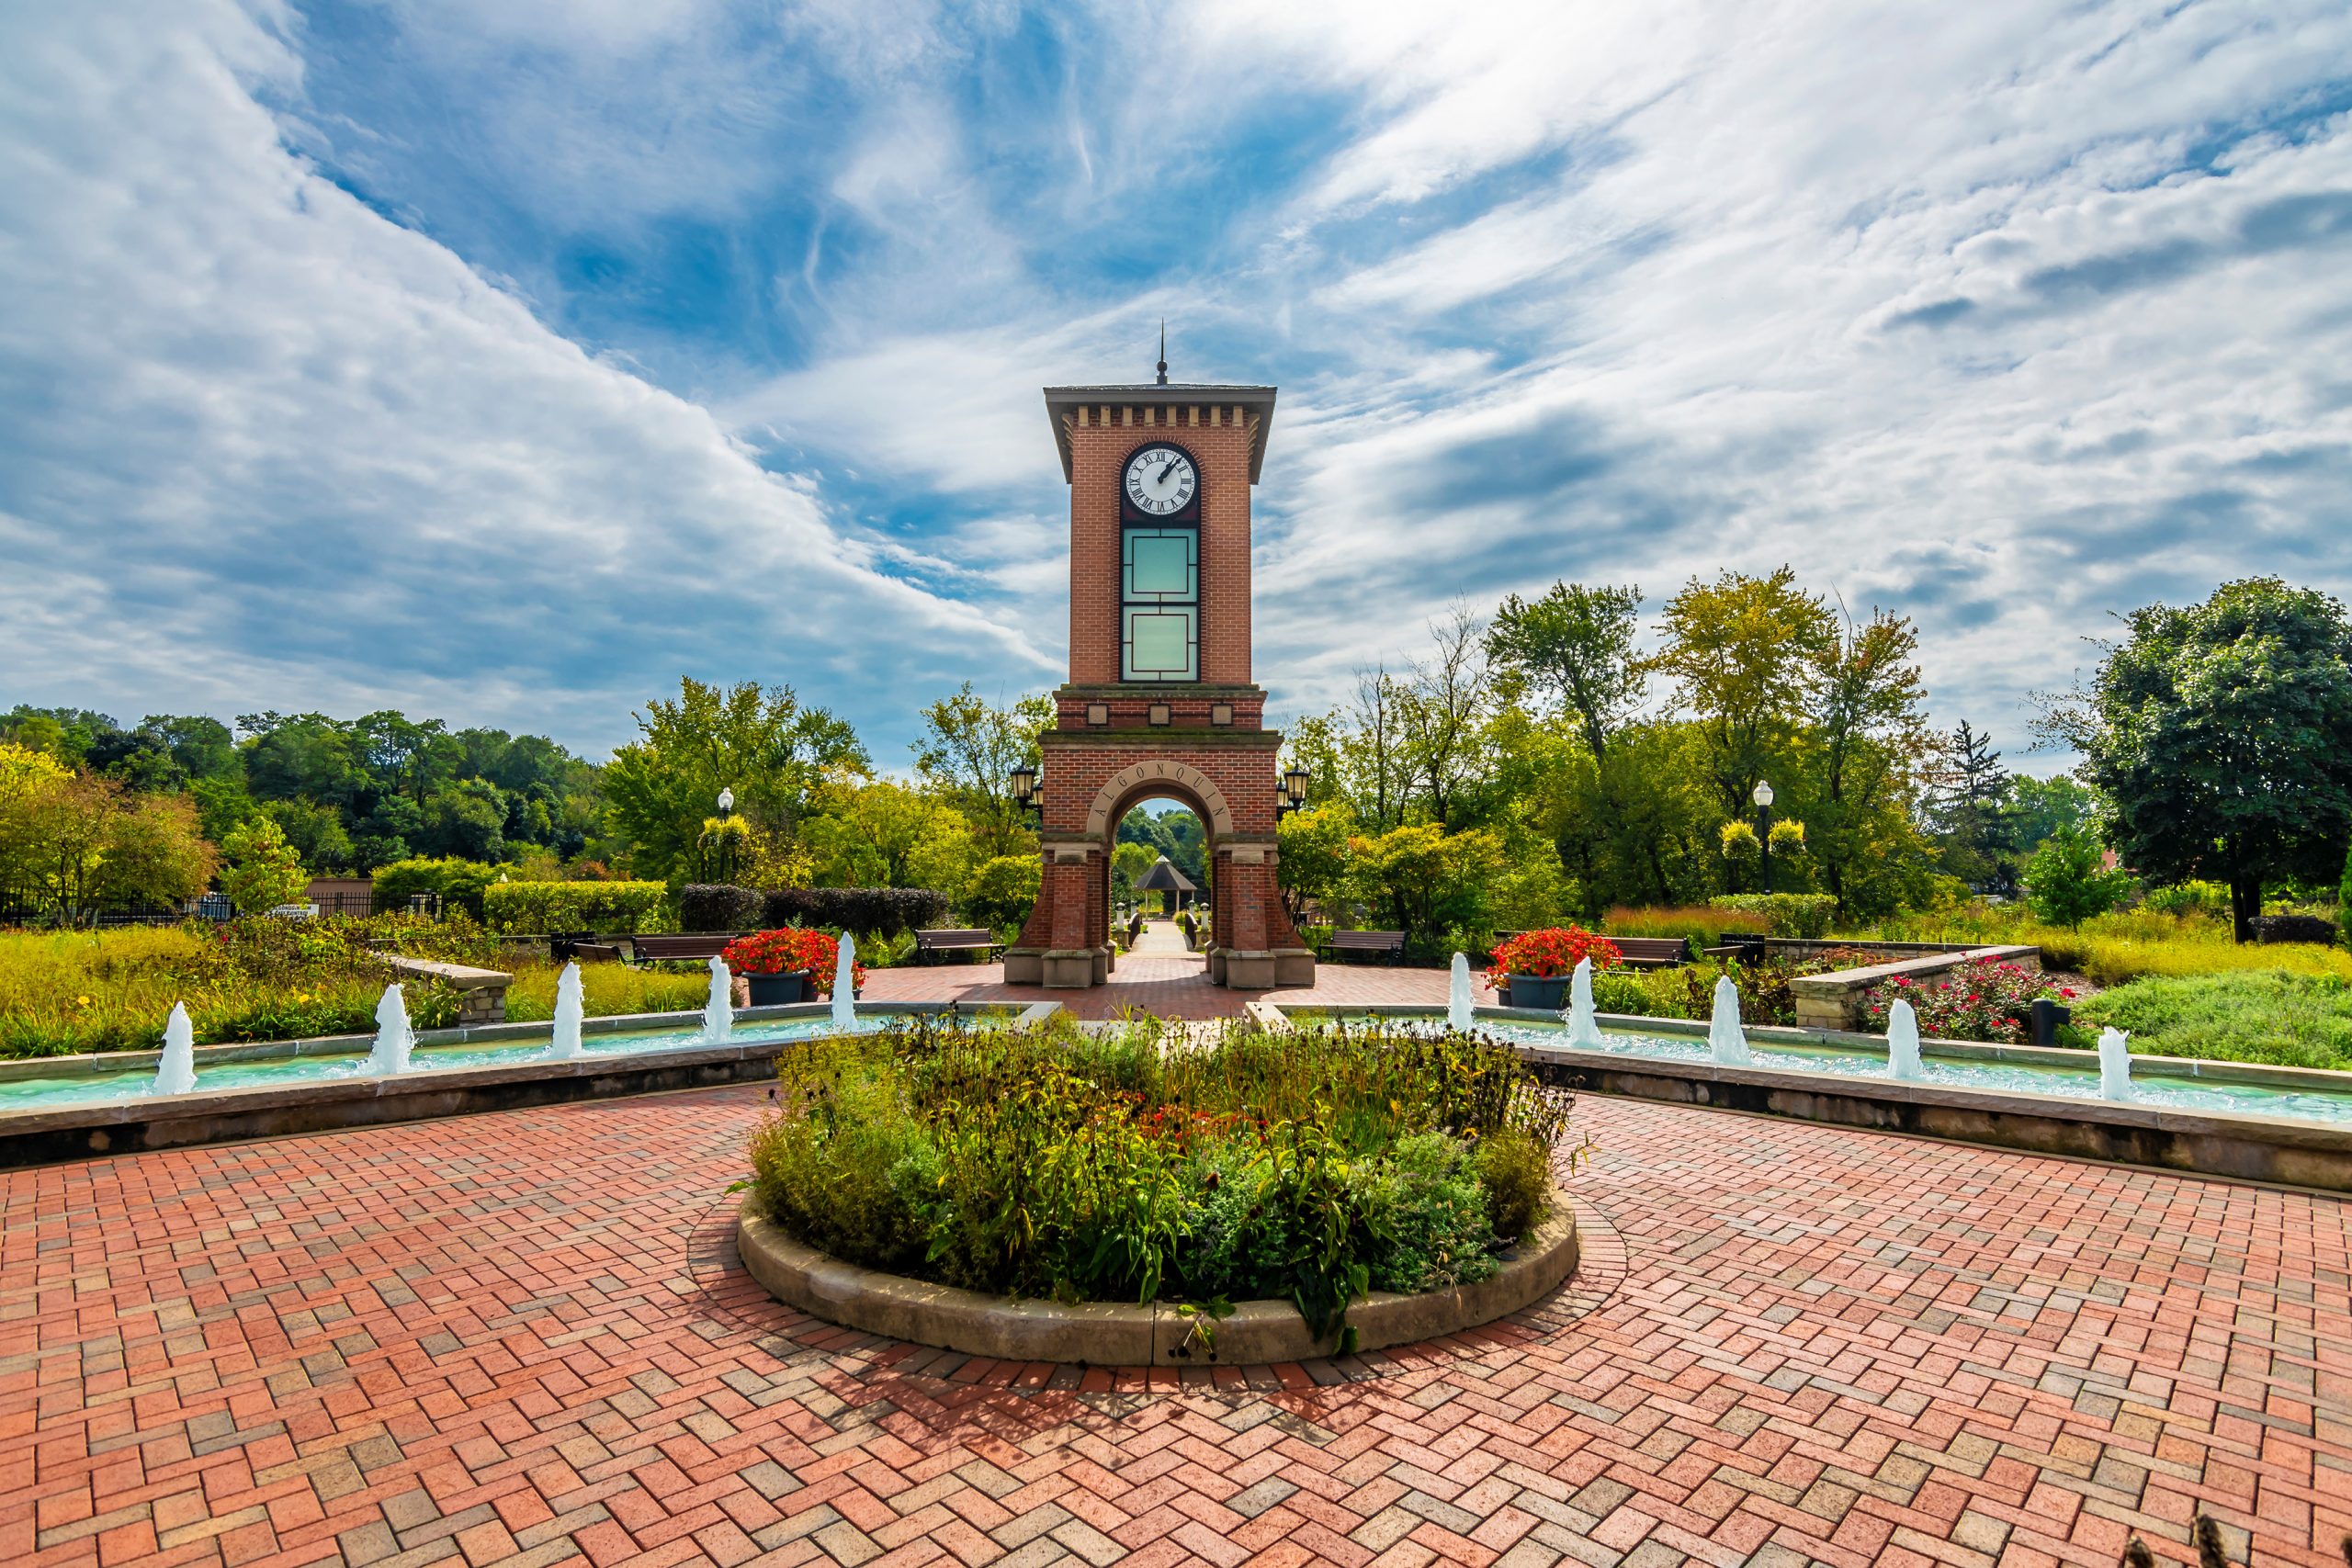 Clock Tower view in Algonquin Town of Illinois